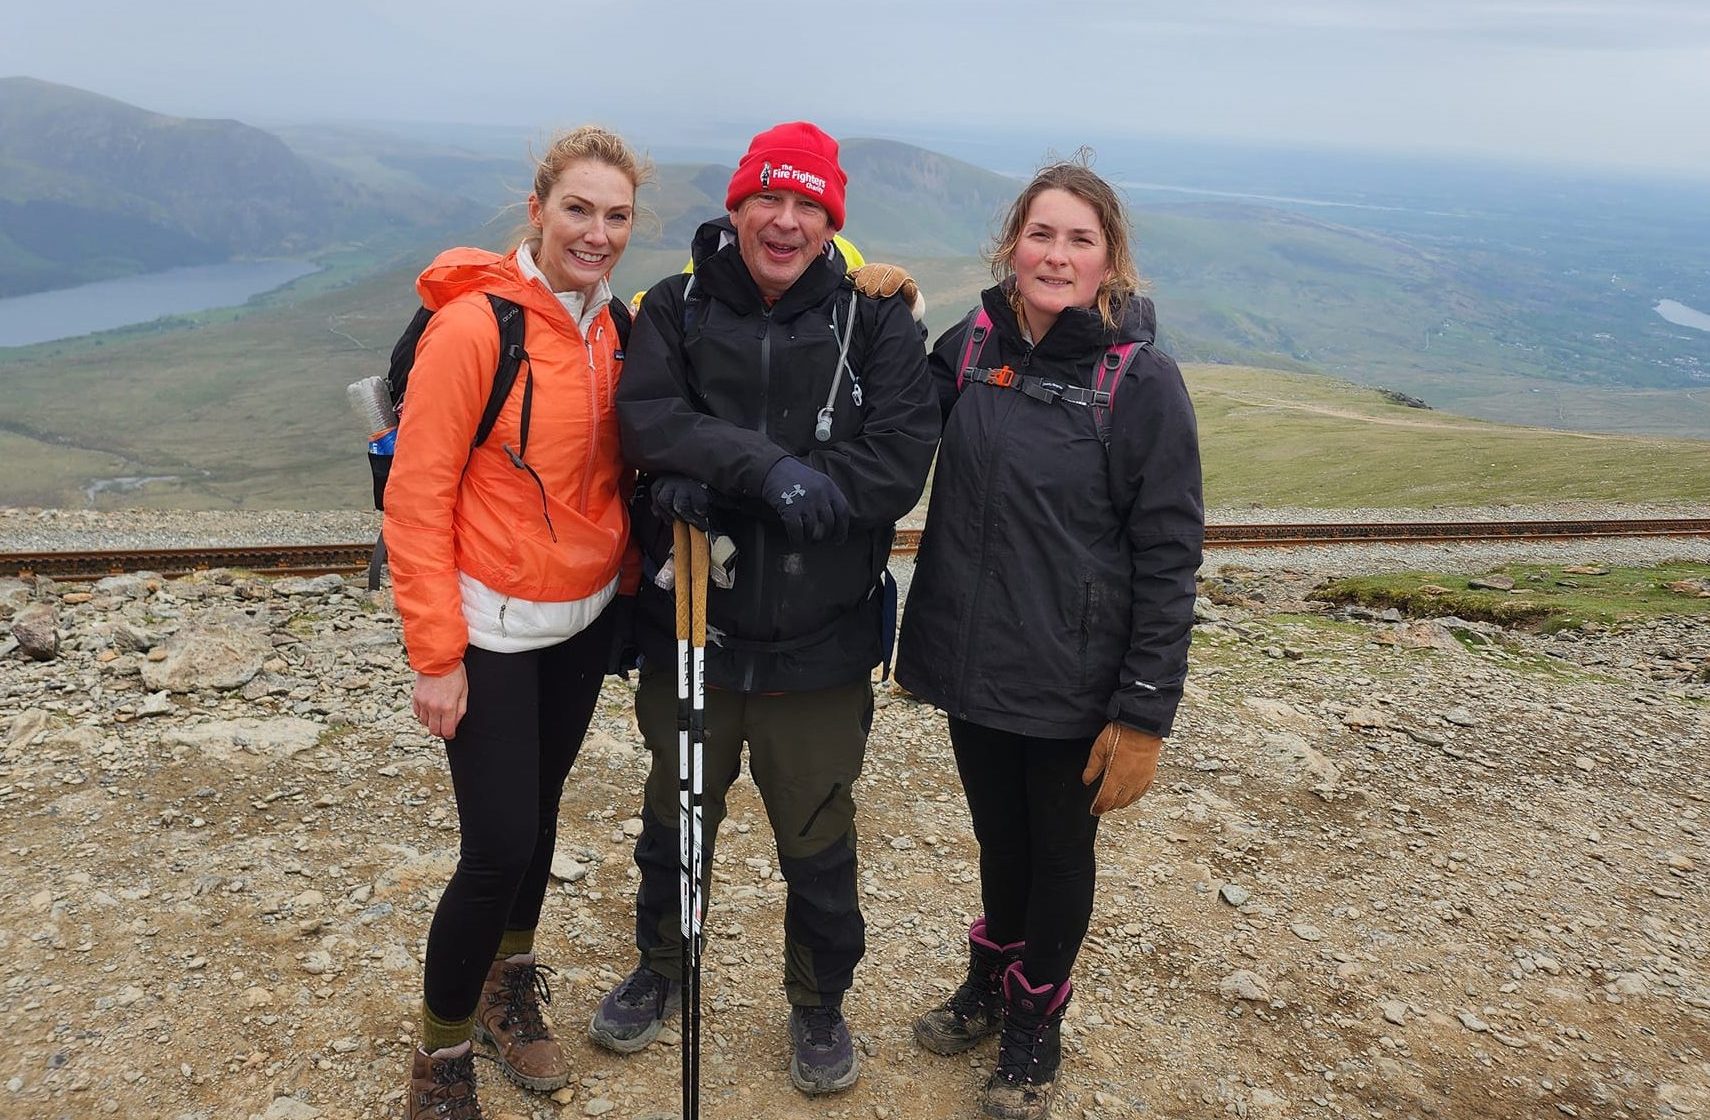 Fire Fighters Charity team raise over £2K with Snowdon climb